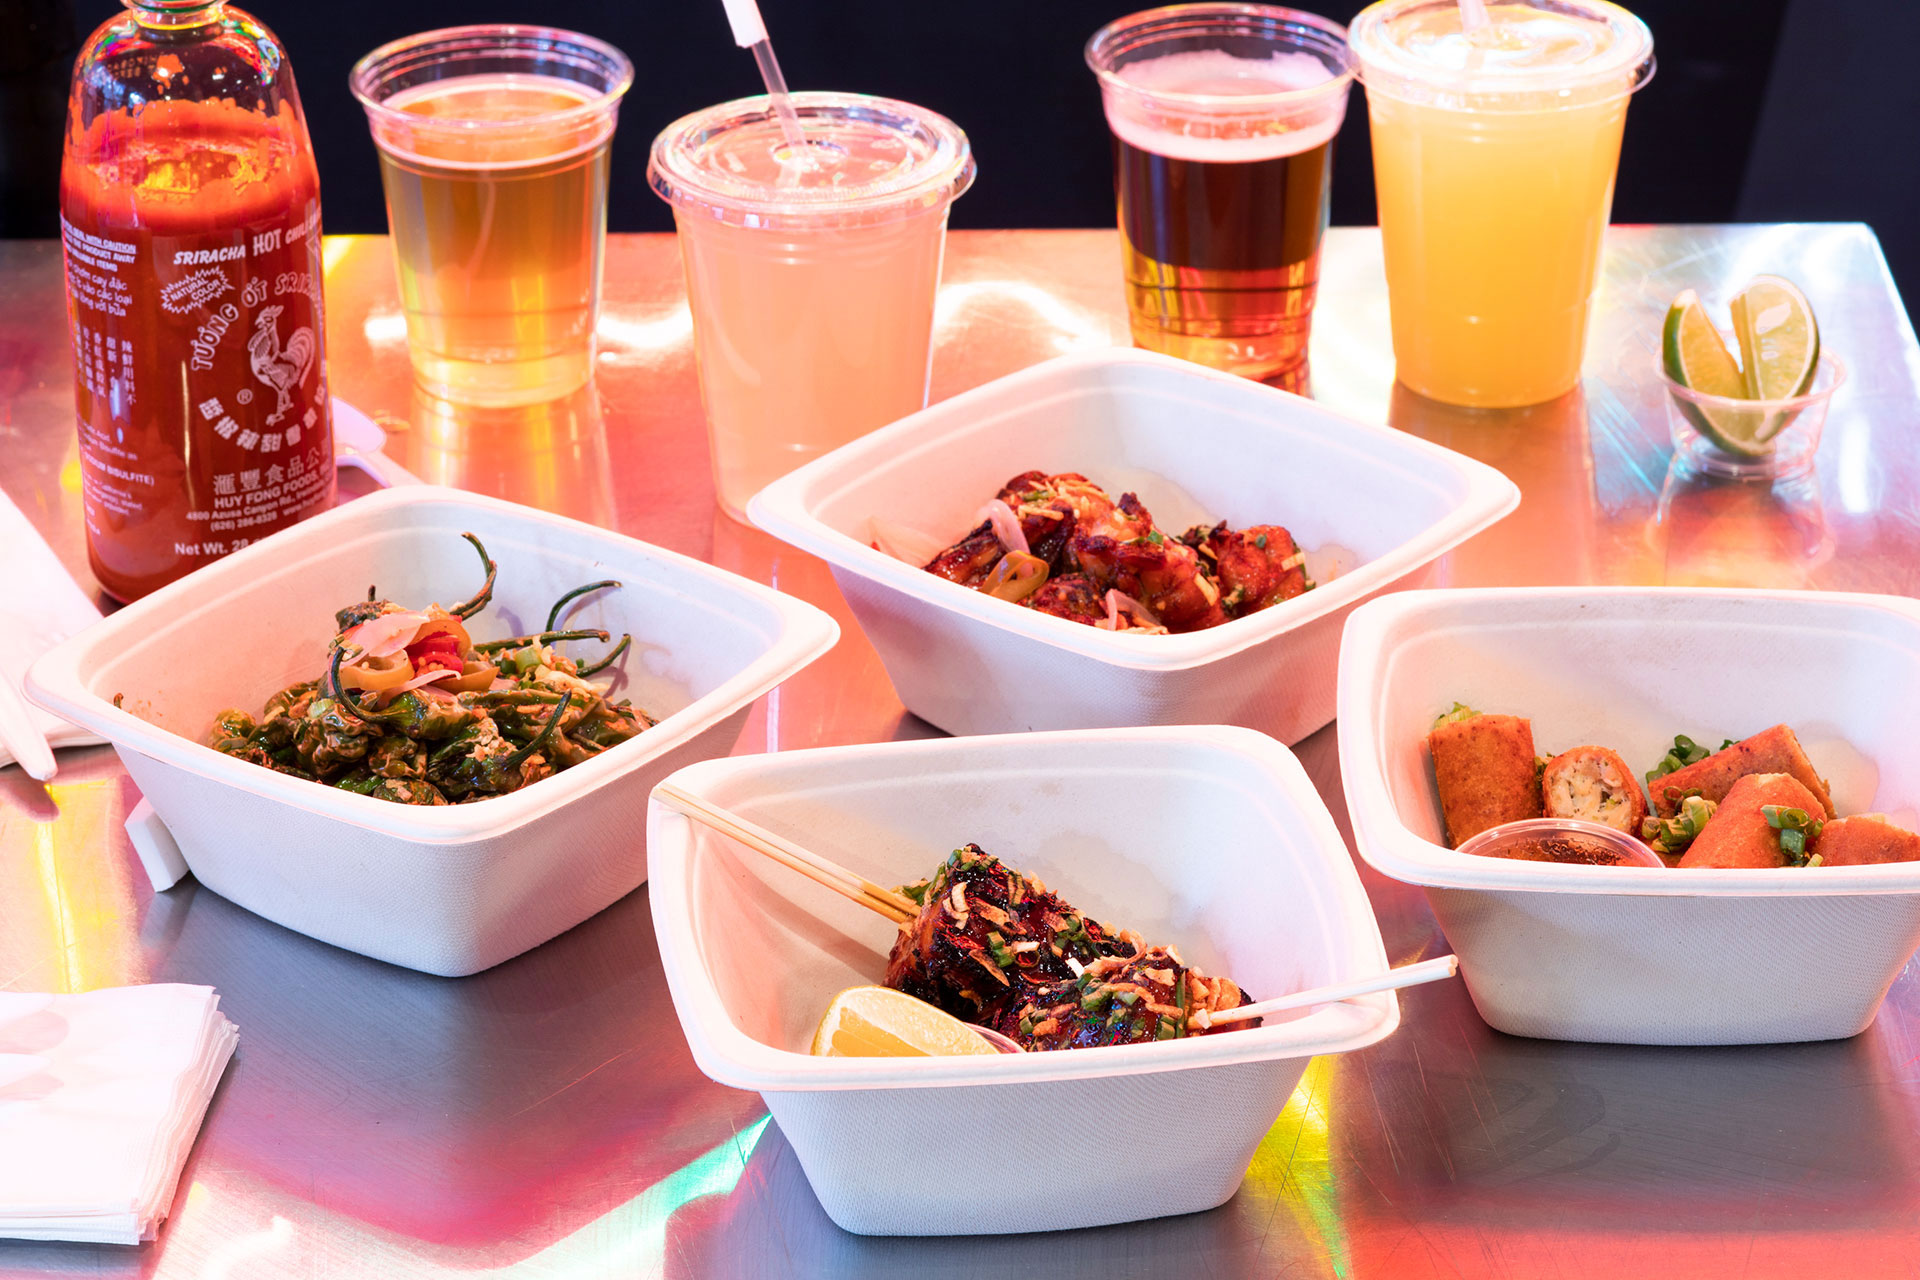 an assortment of appetizers from sari sari including lumpia, shishito peppers, and skewers, set against multiple beers and fresh juices